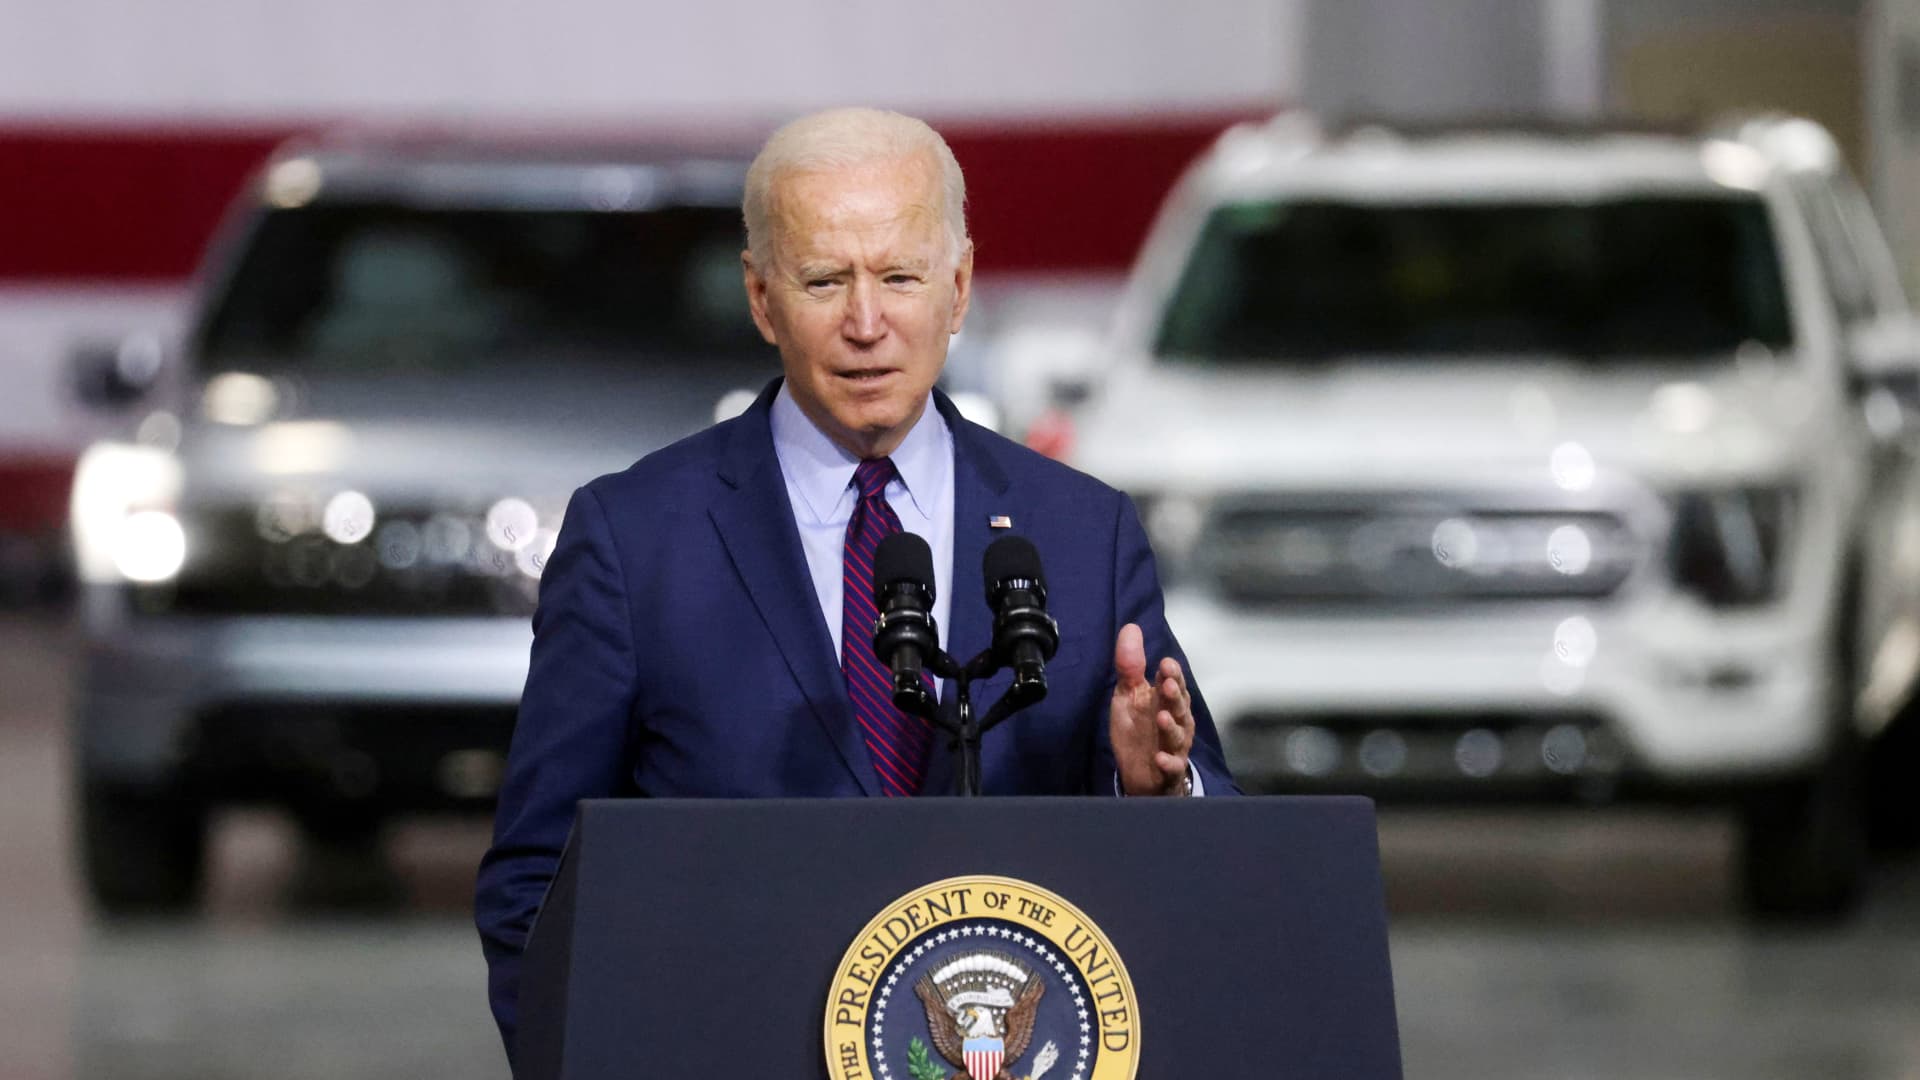 Biden digs at Tesla CEO Elon Musk on economy, touts Ford